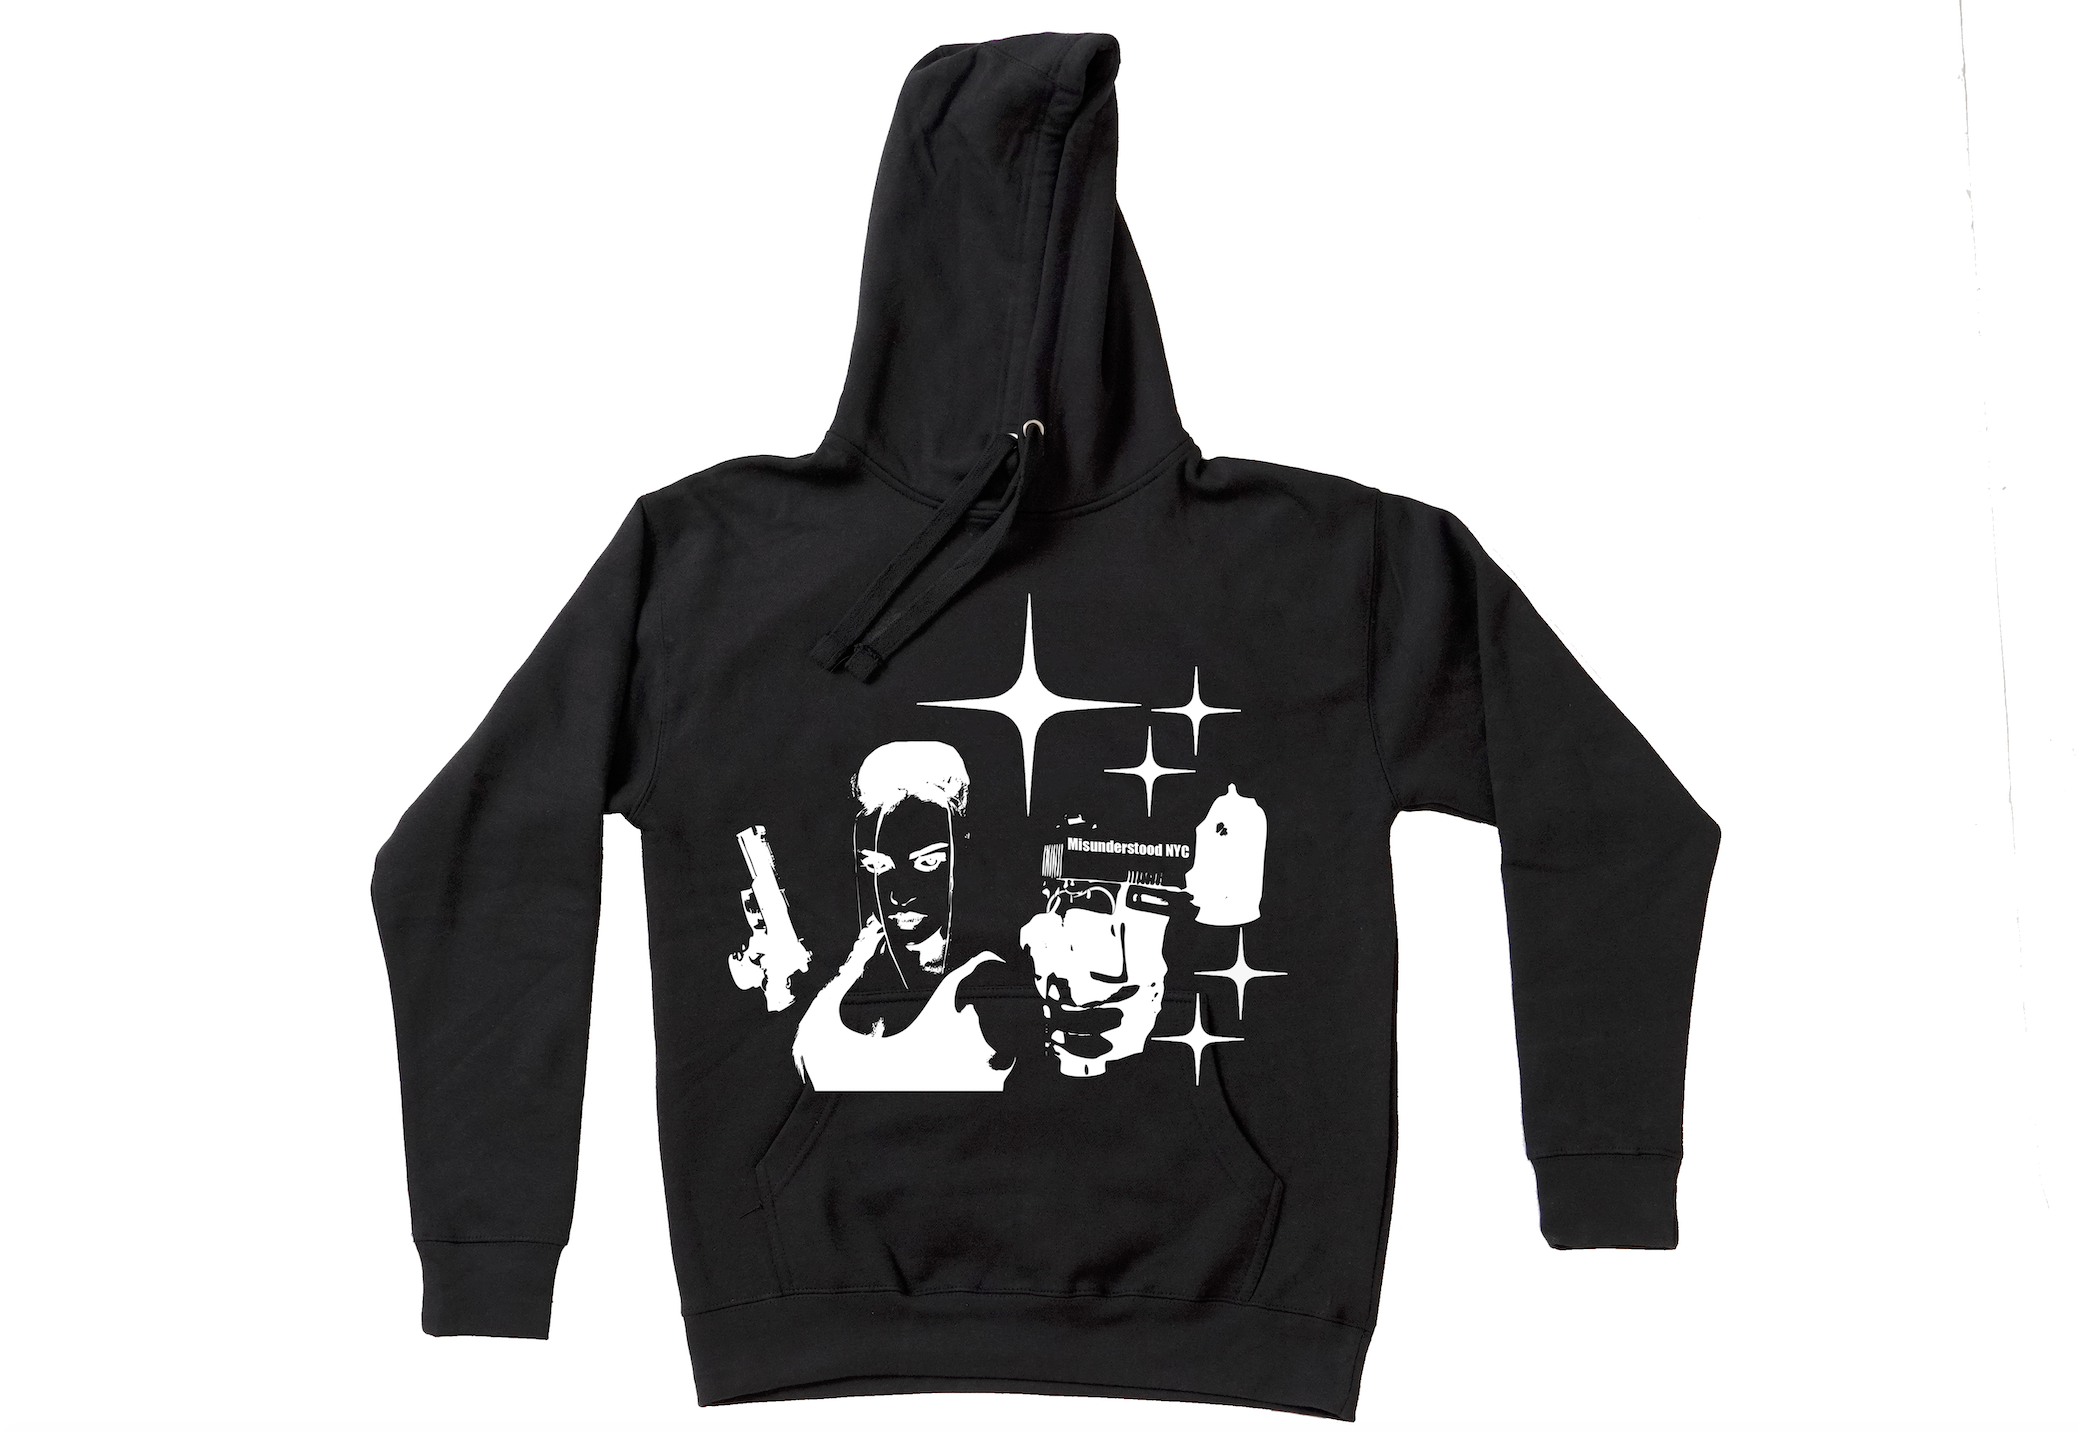 NYC Underground Microplush Zip Front Hooded Onesie on sale at shophq.com -  755-546